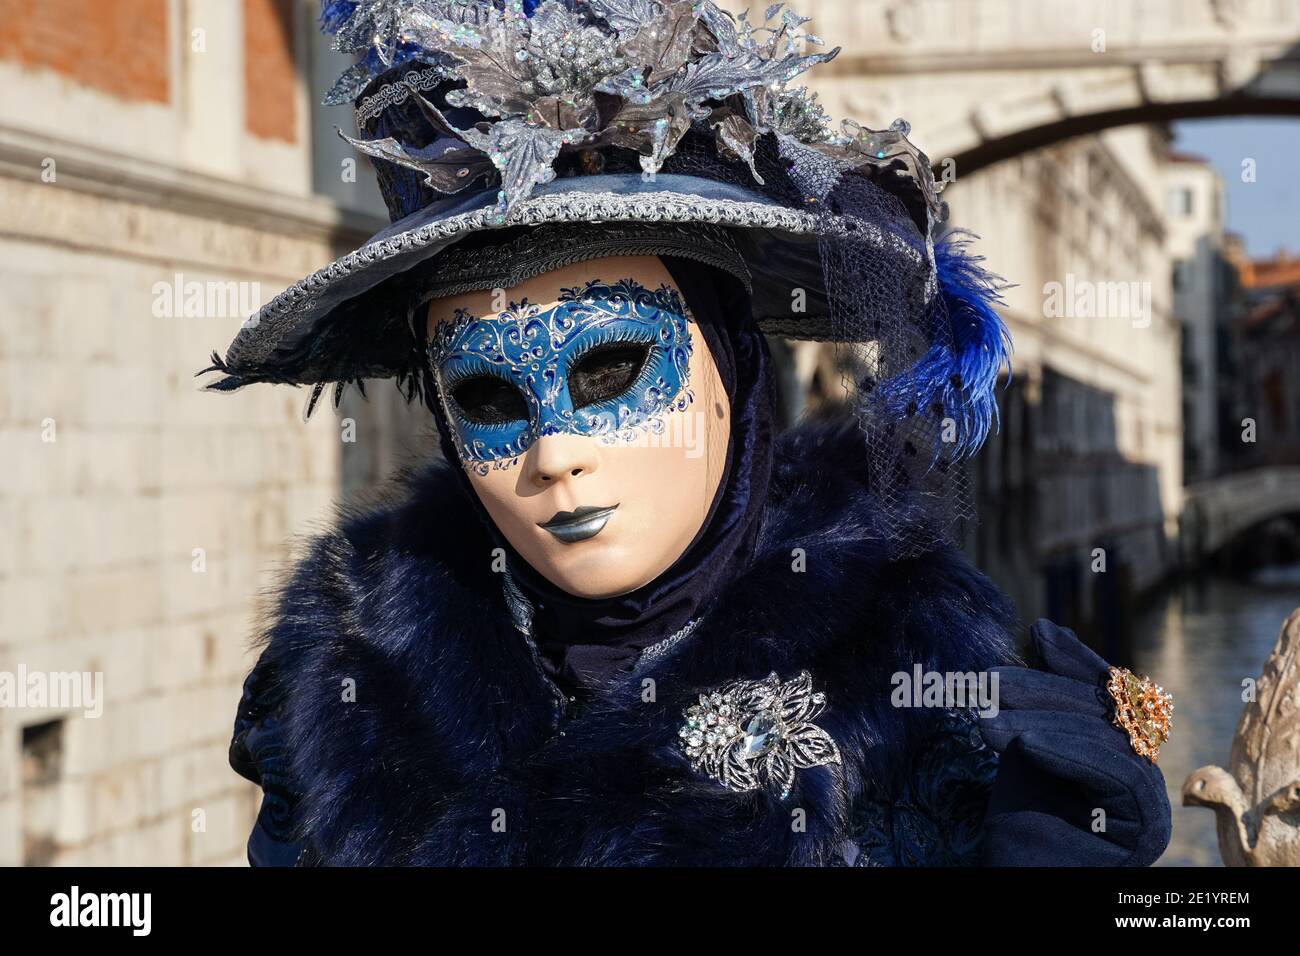 Woman dressed in traditional decorated costume with hat and painted mask during the Venice Carnival in Venice, Italy Stock Photo